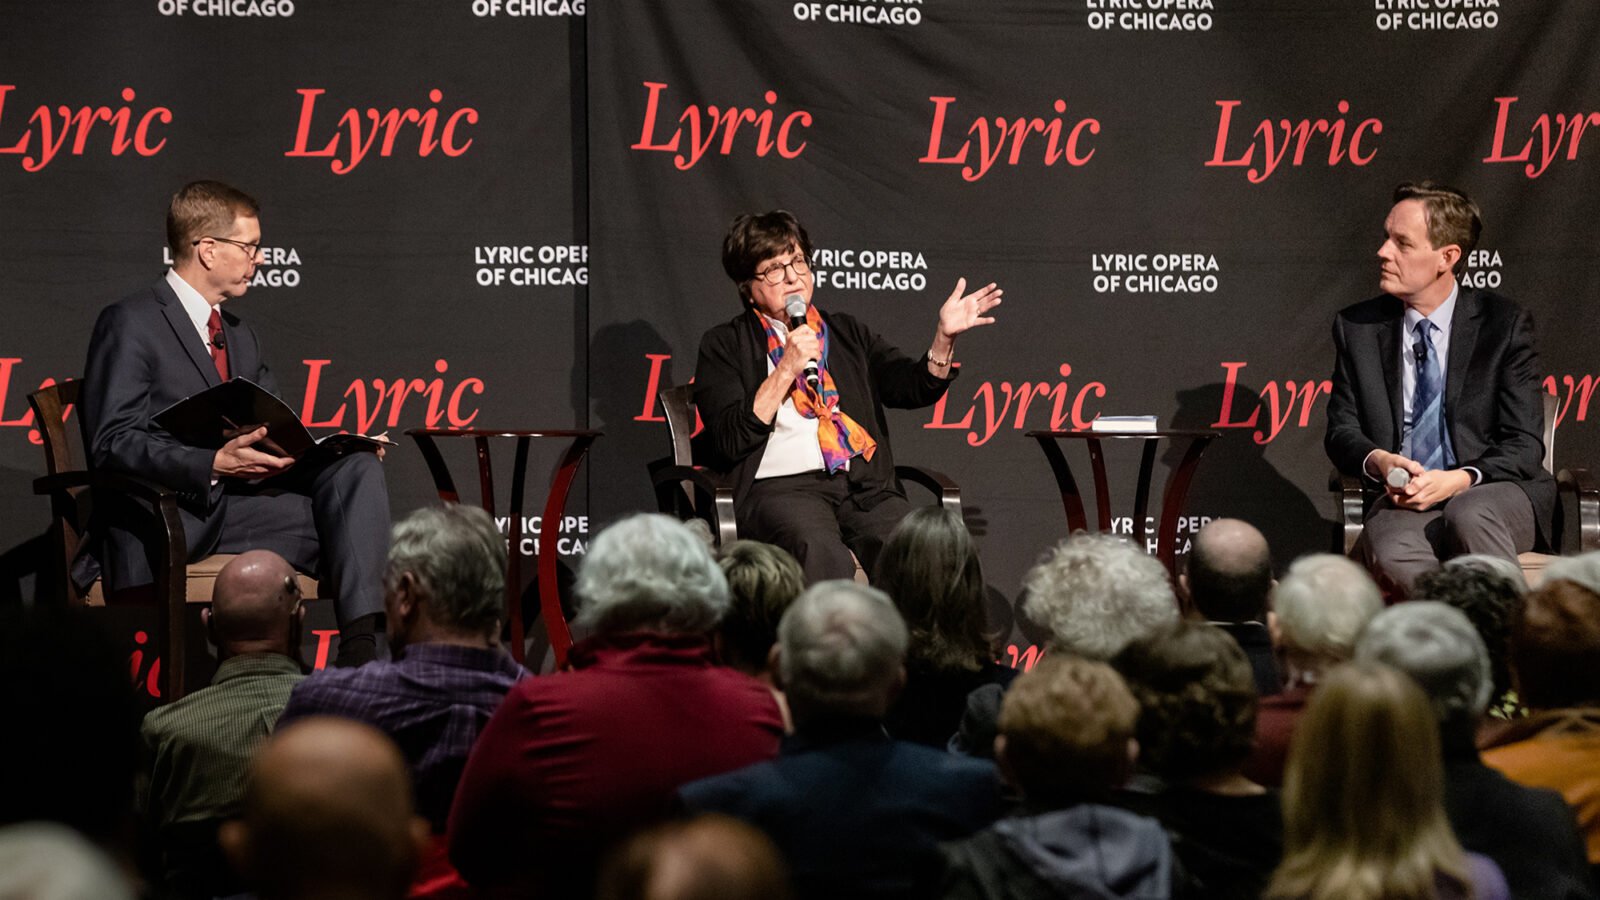 onstage at a Lyric Opera panel, Sister Helen Prejean speaks, center, with George Preston and Jake Heggie looking on thoughtfully. A full audience observes attently